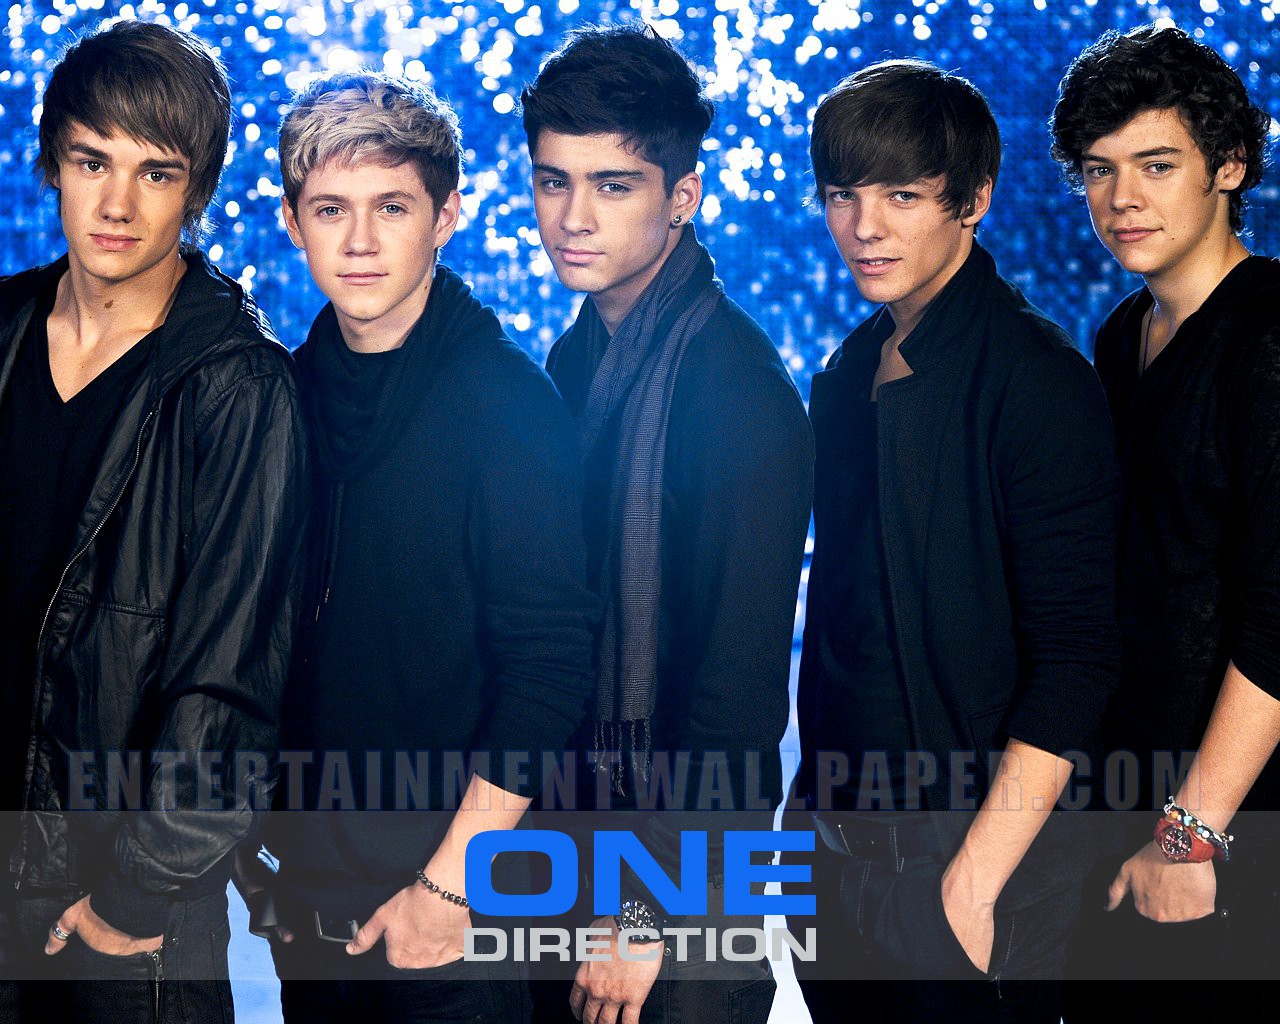 1d S Wallpaper One Direction